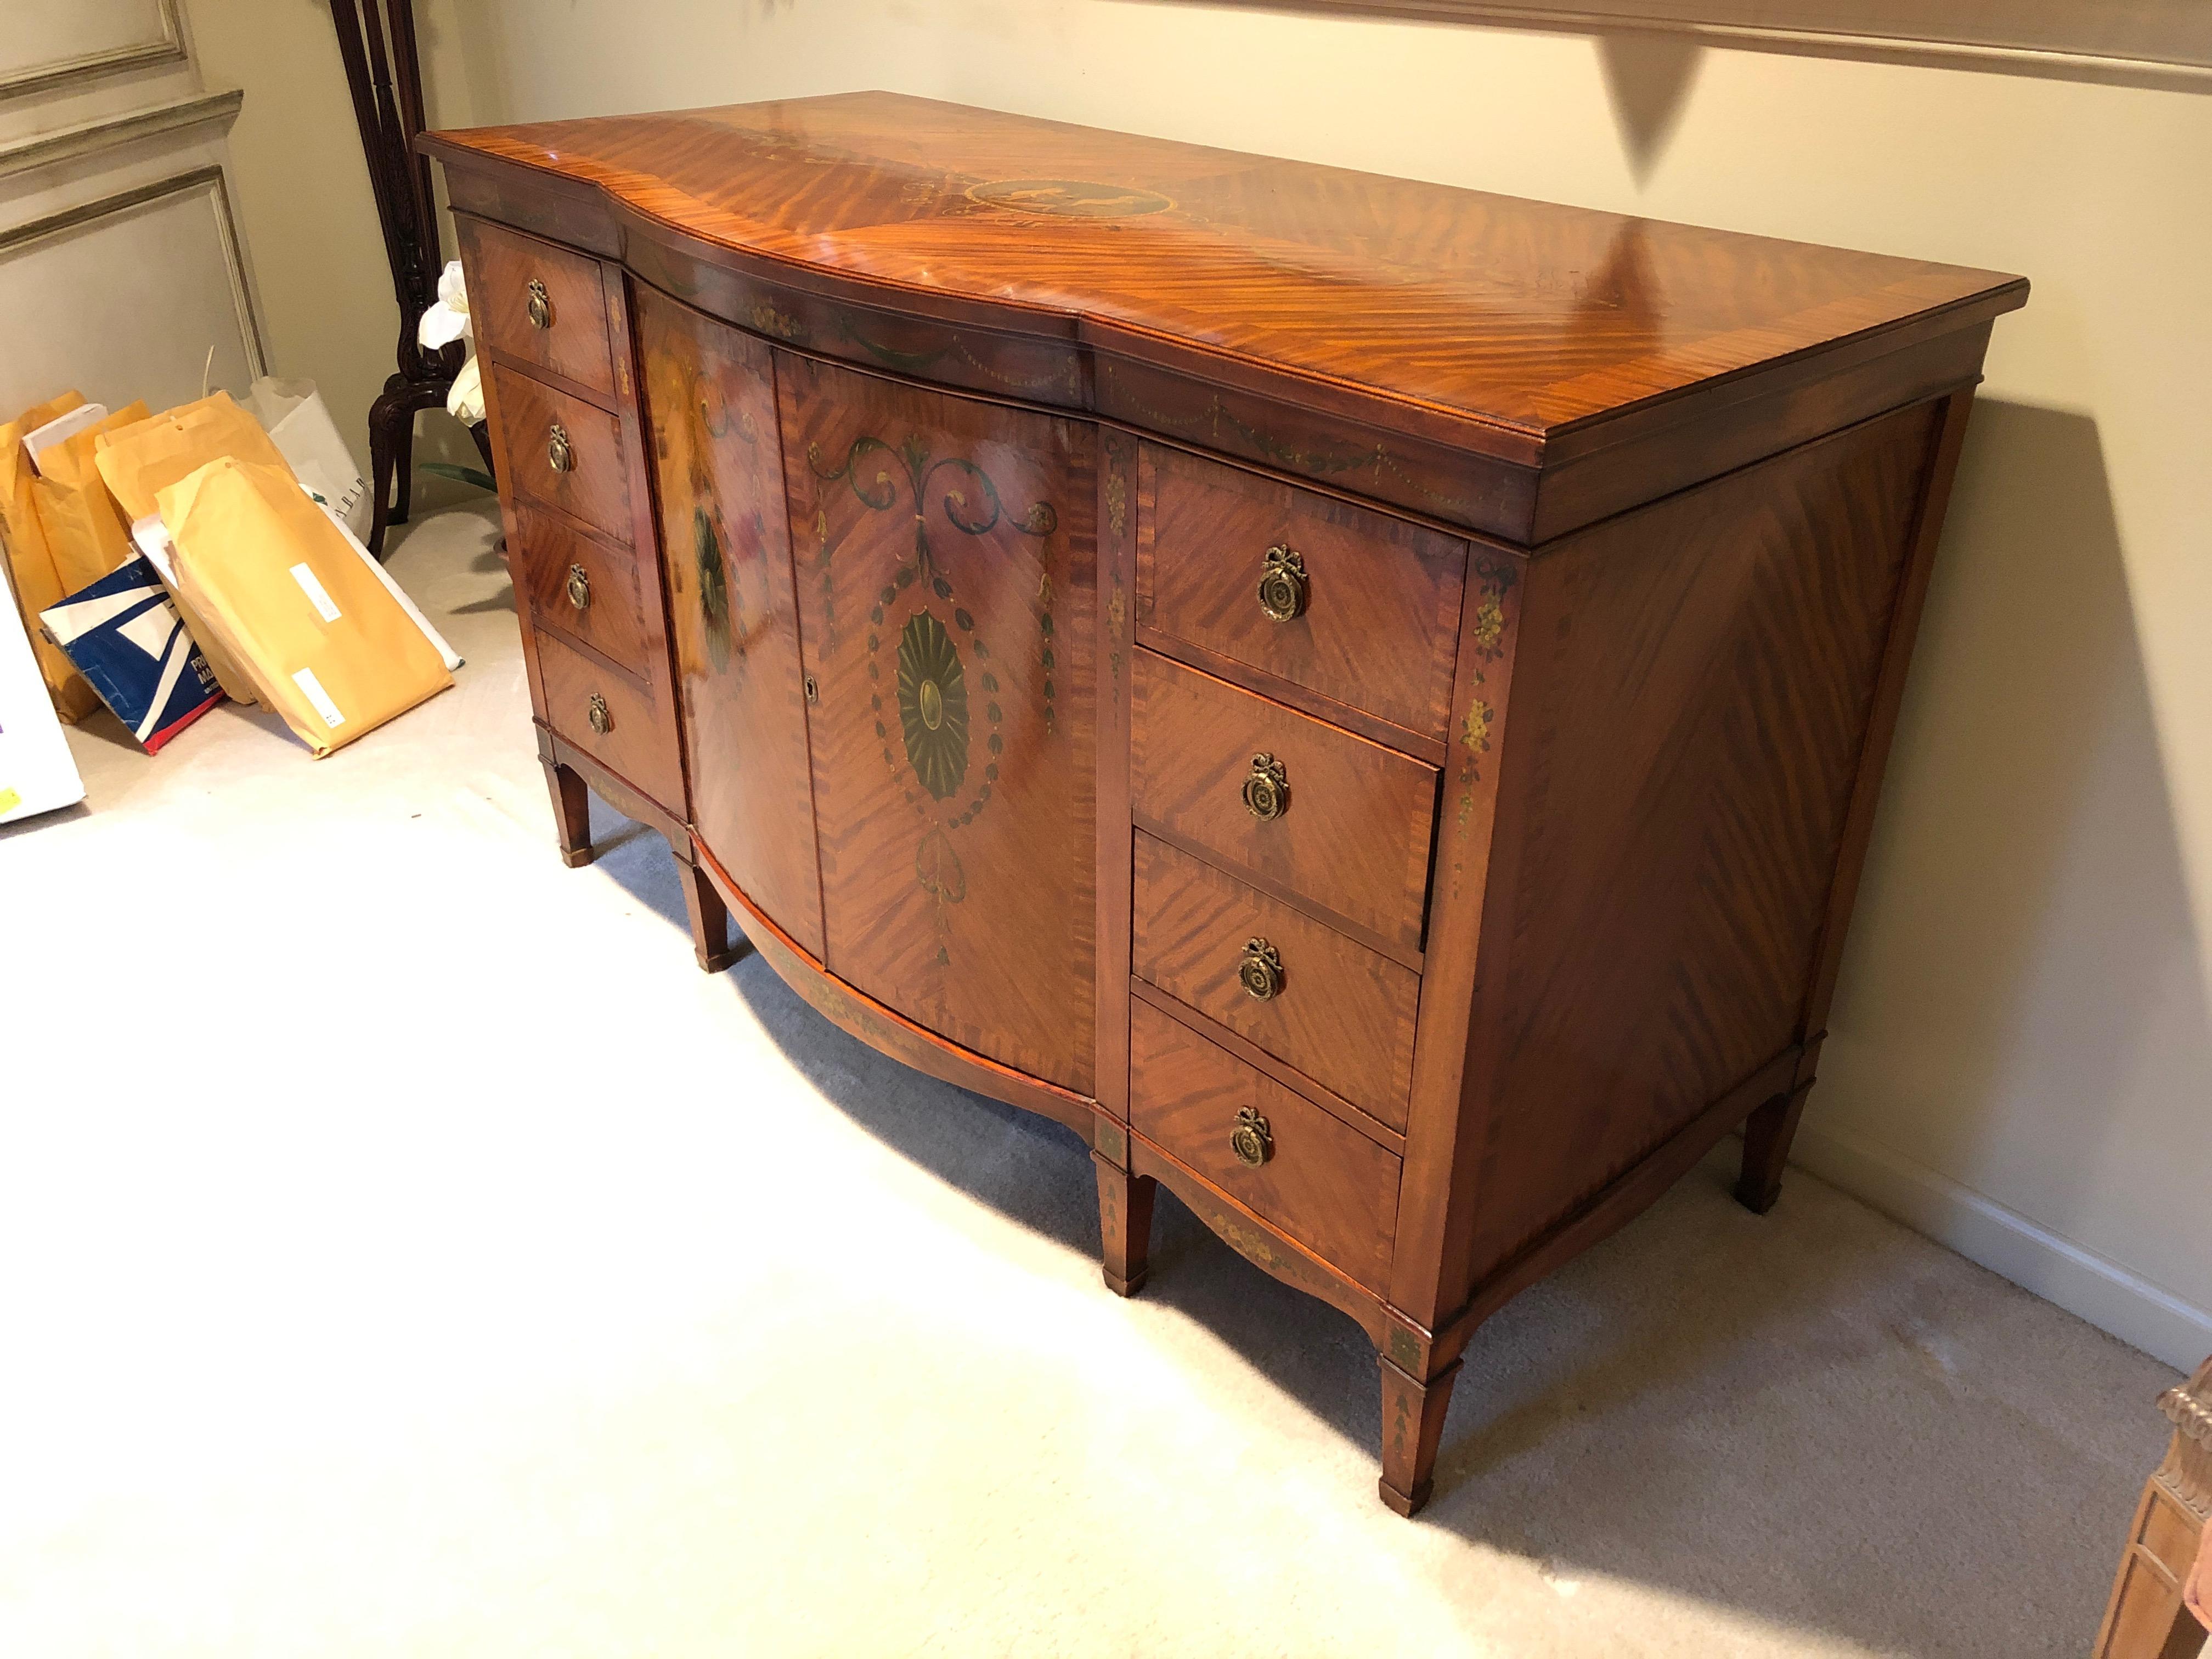 A fine painted satinwood veneer Sheraton Revival sideboard buffet having a frieze and bow front pair of doors painted in Adams style with neoclassical swags, paterae with scrolls and bellflower pendants, having 4 pull out interior drawers or shelves